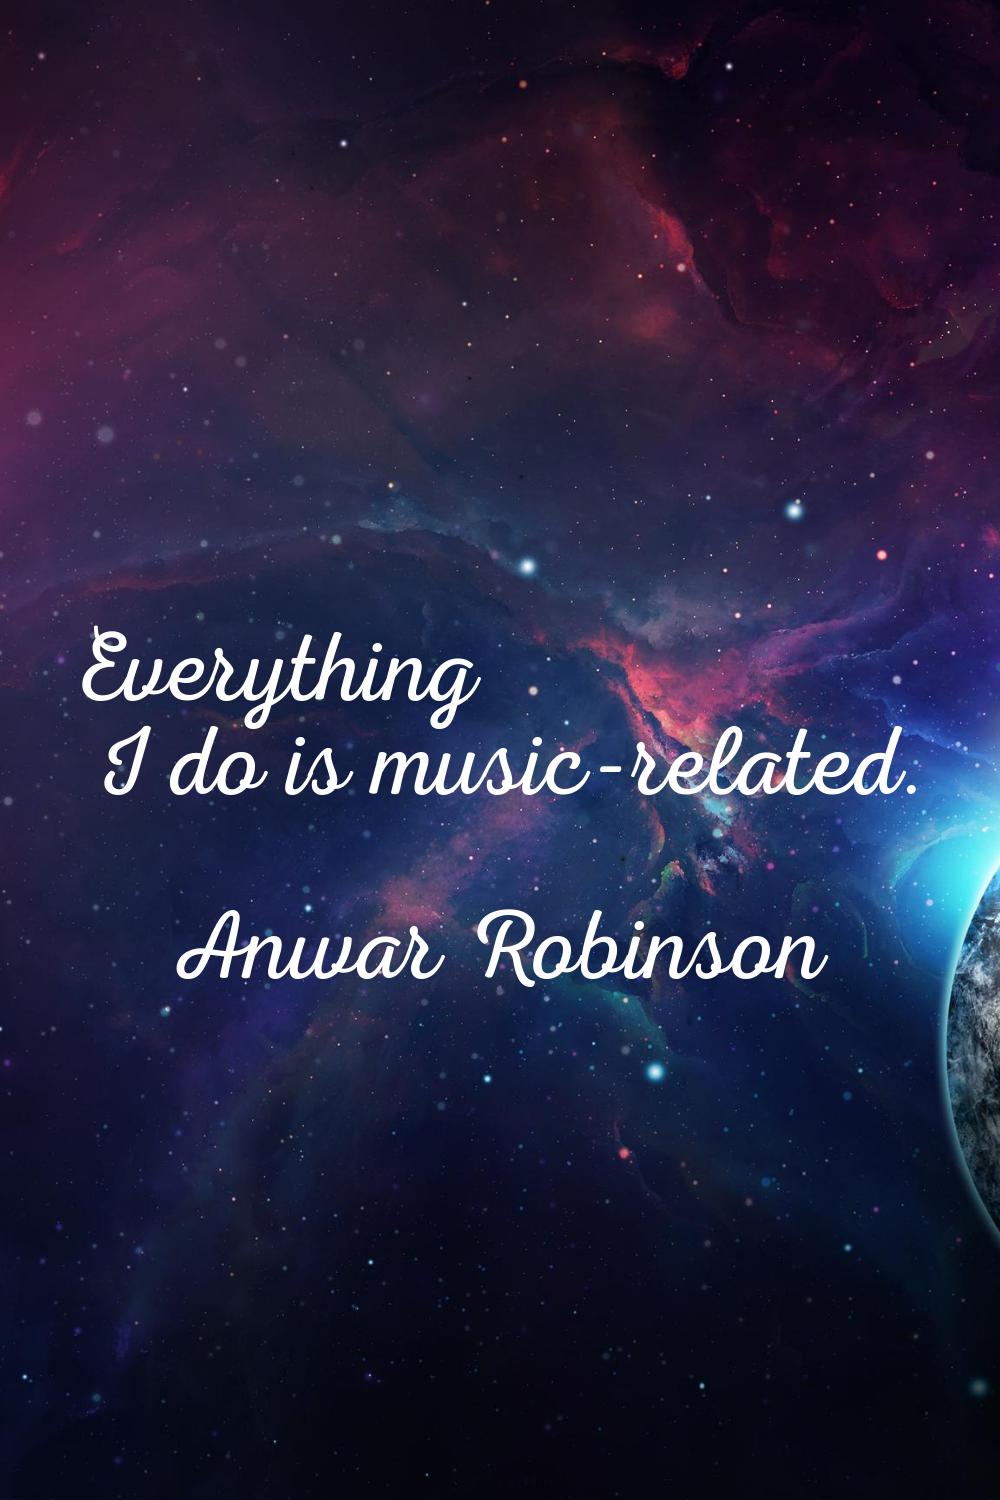 Everything I do is music-related.